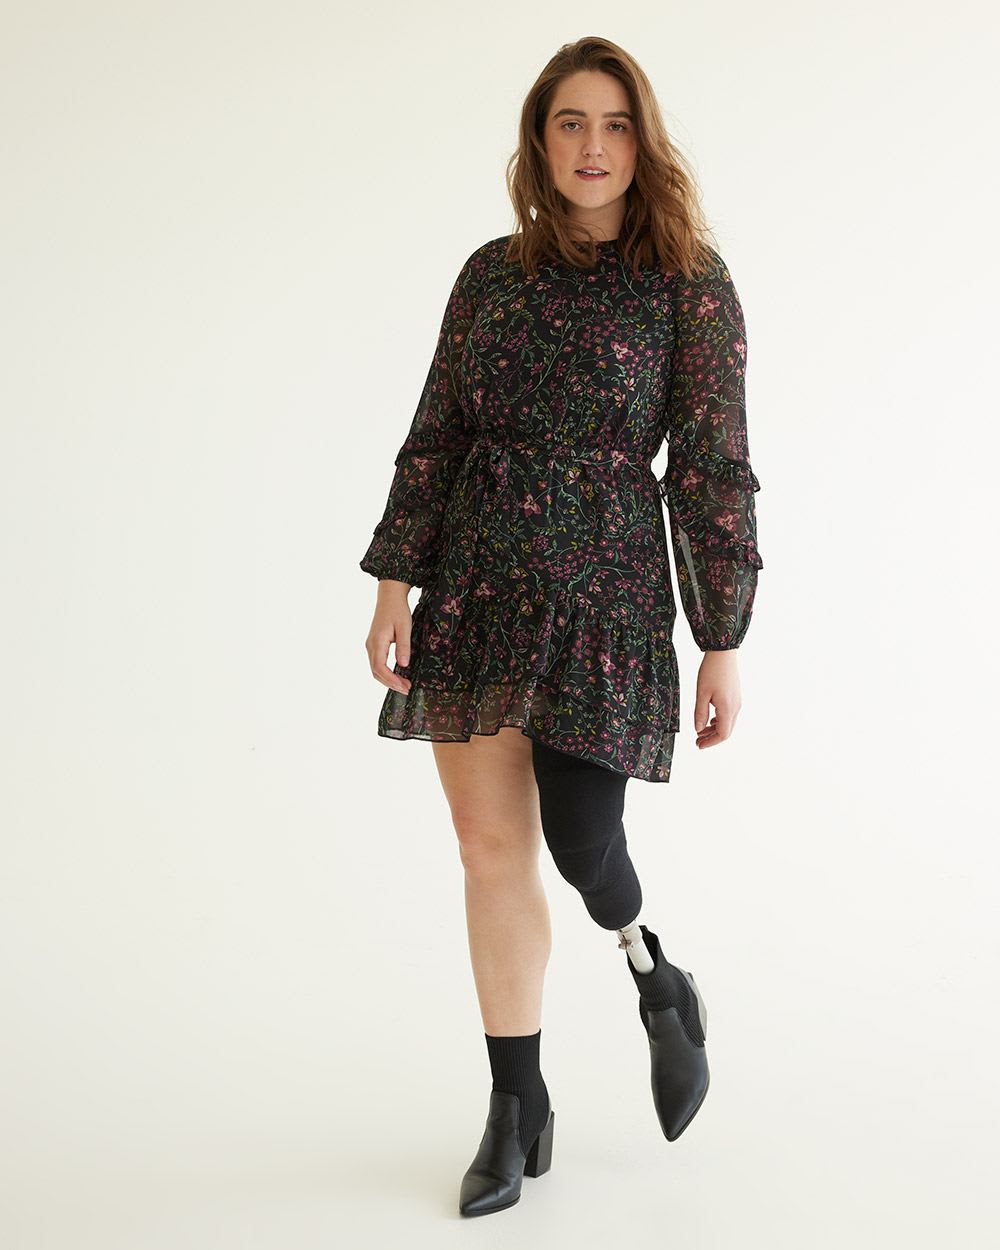 Long-Sleeve Shift Dress with Ruffled Details